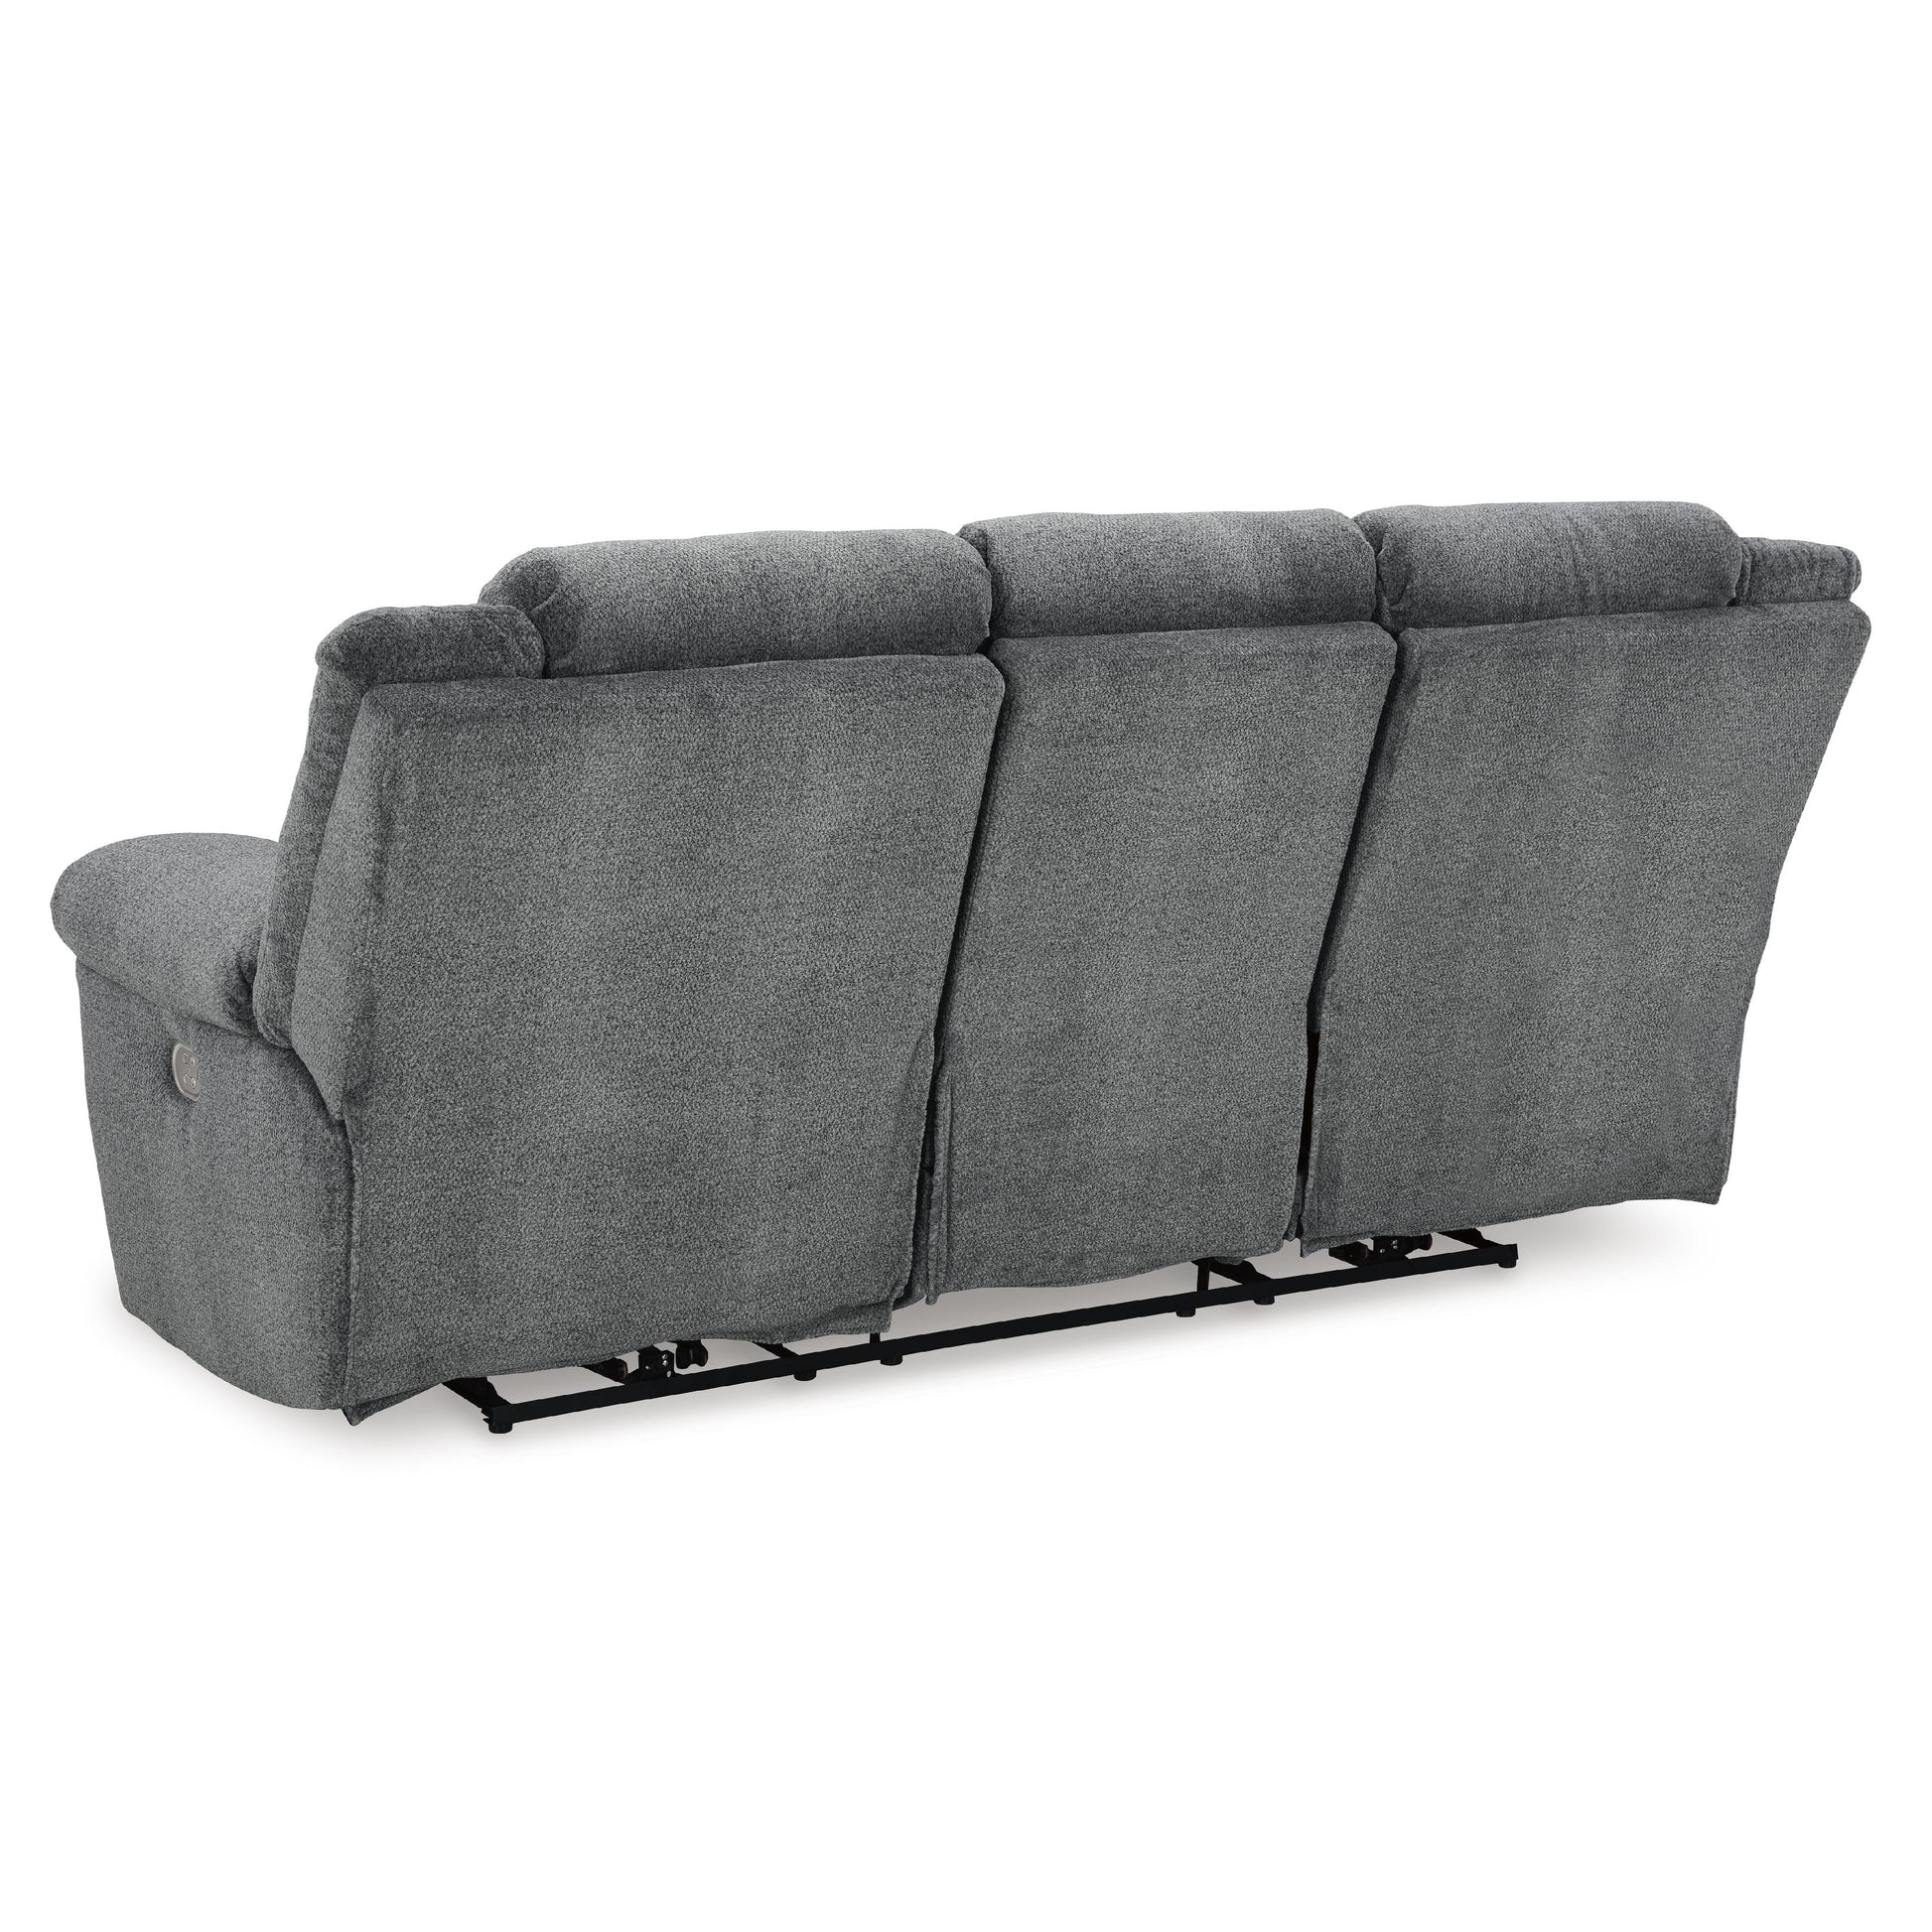 Signature Design by Ashley Tip-Off Power Reclining Sofa 6930415 IMAGE 5